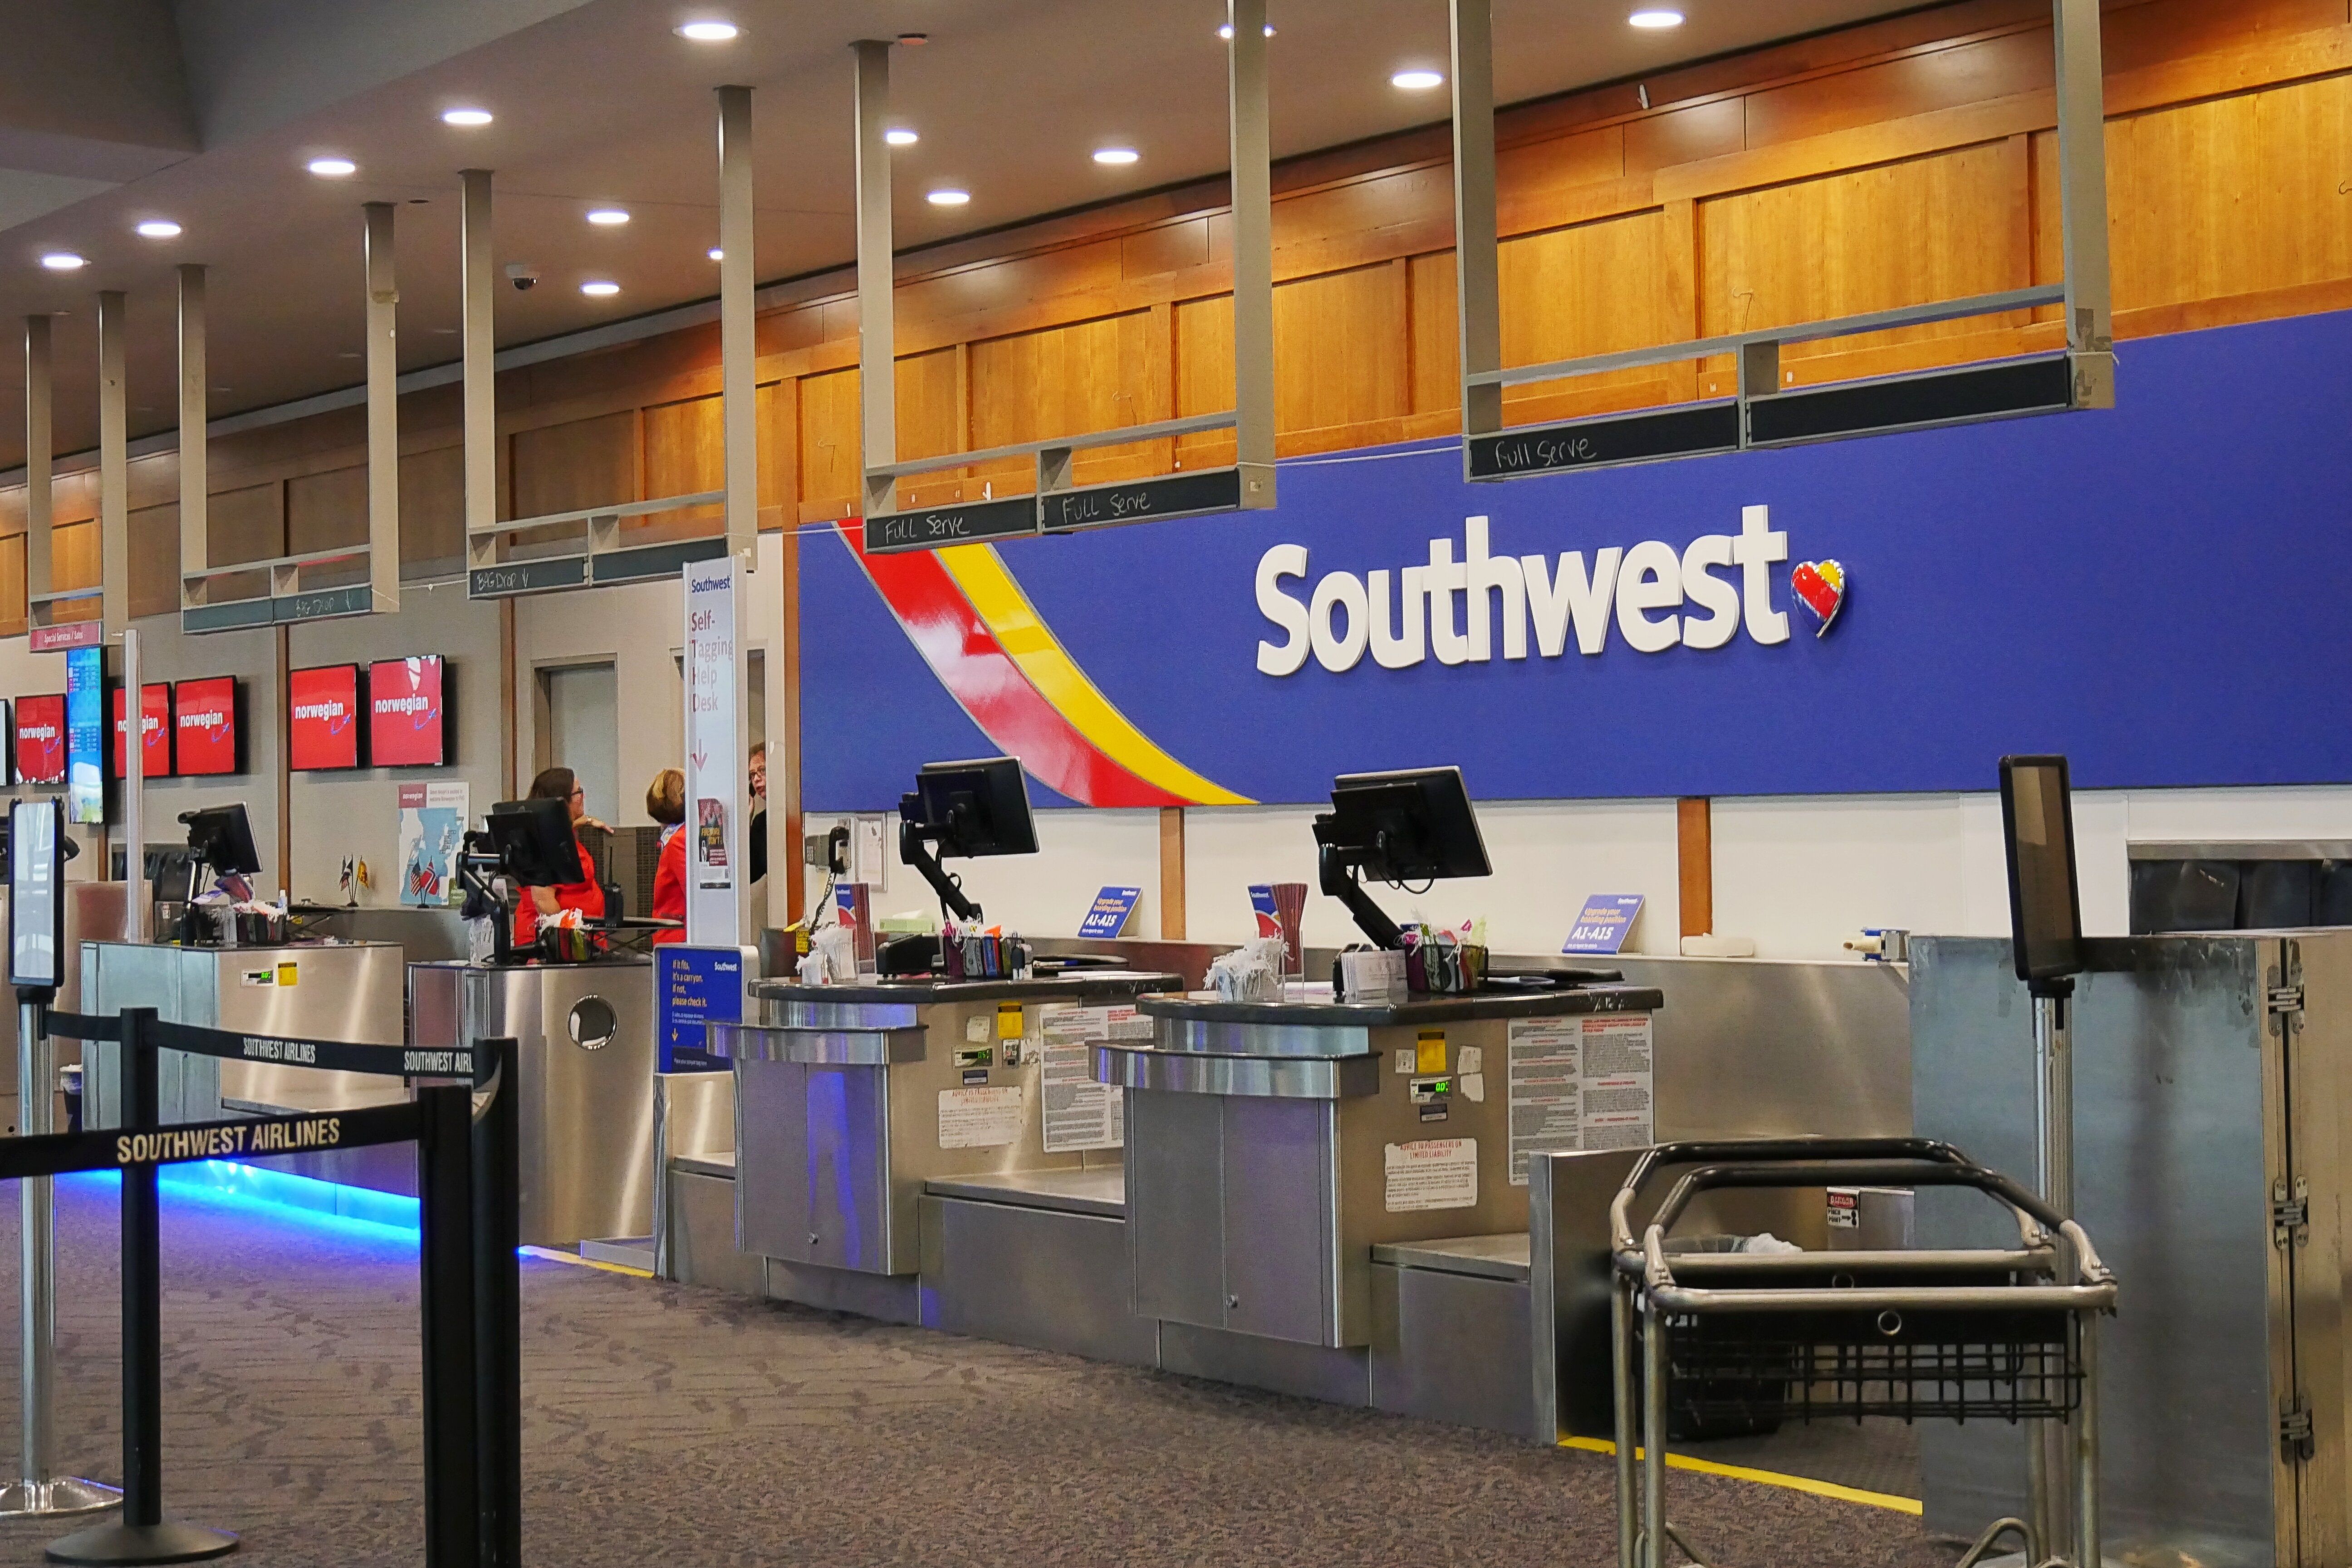 A Southwest Airlines check-in counter.